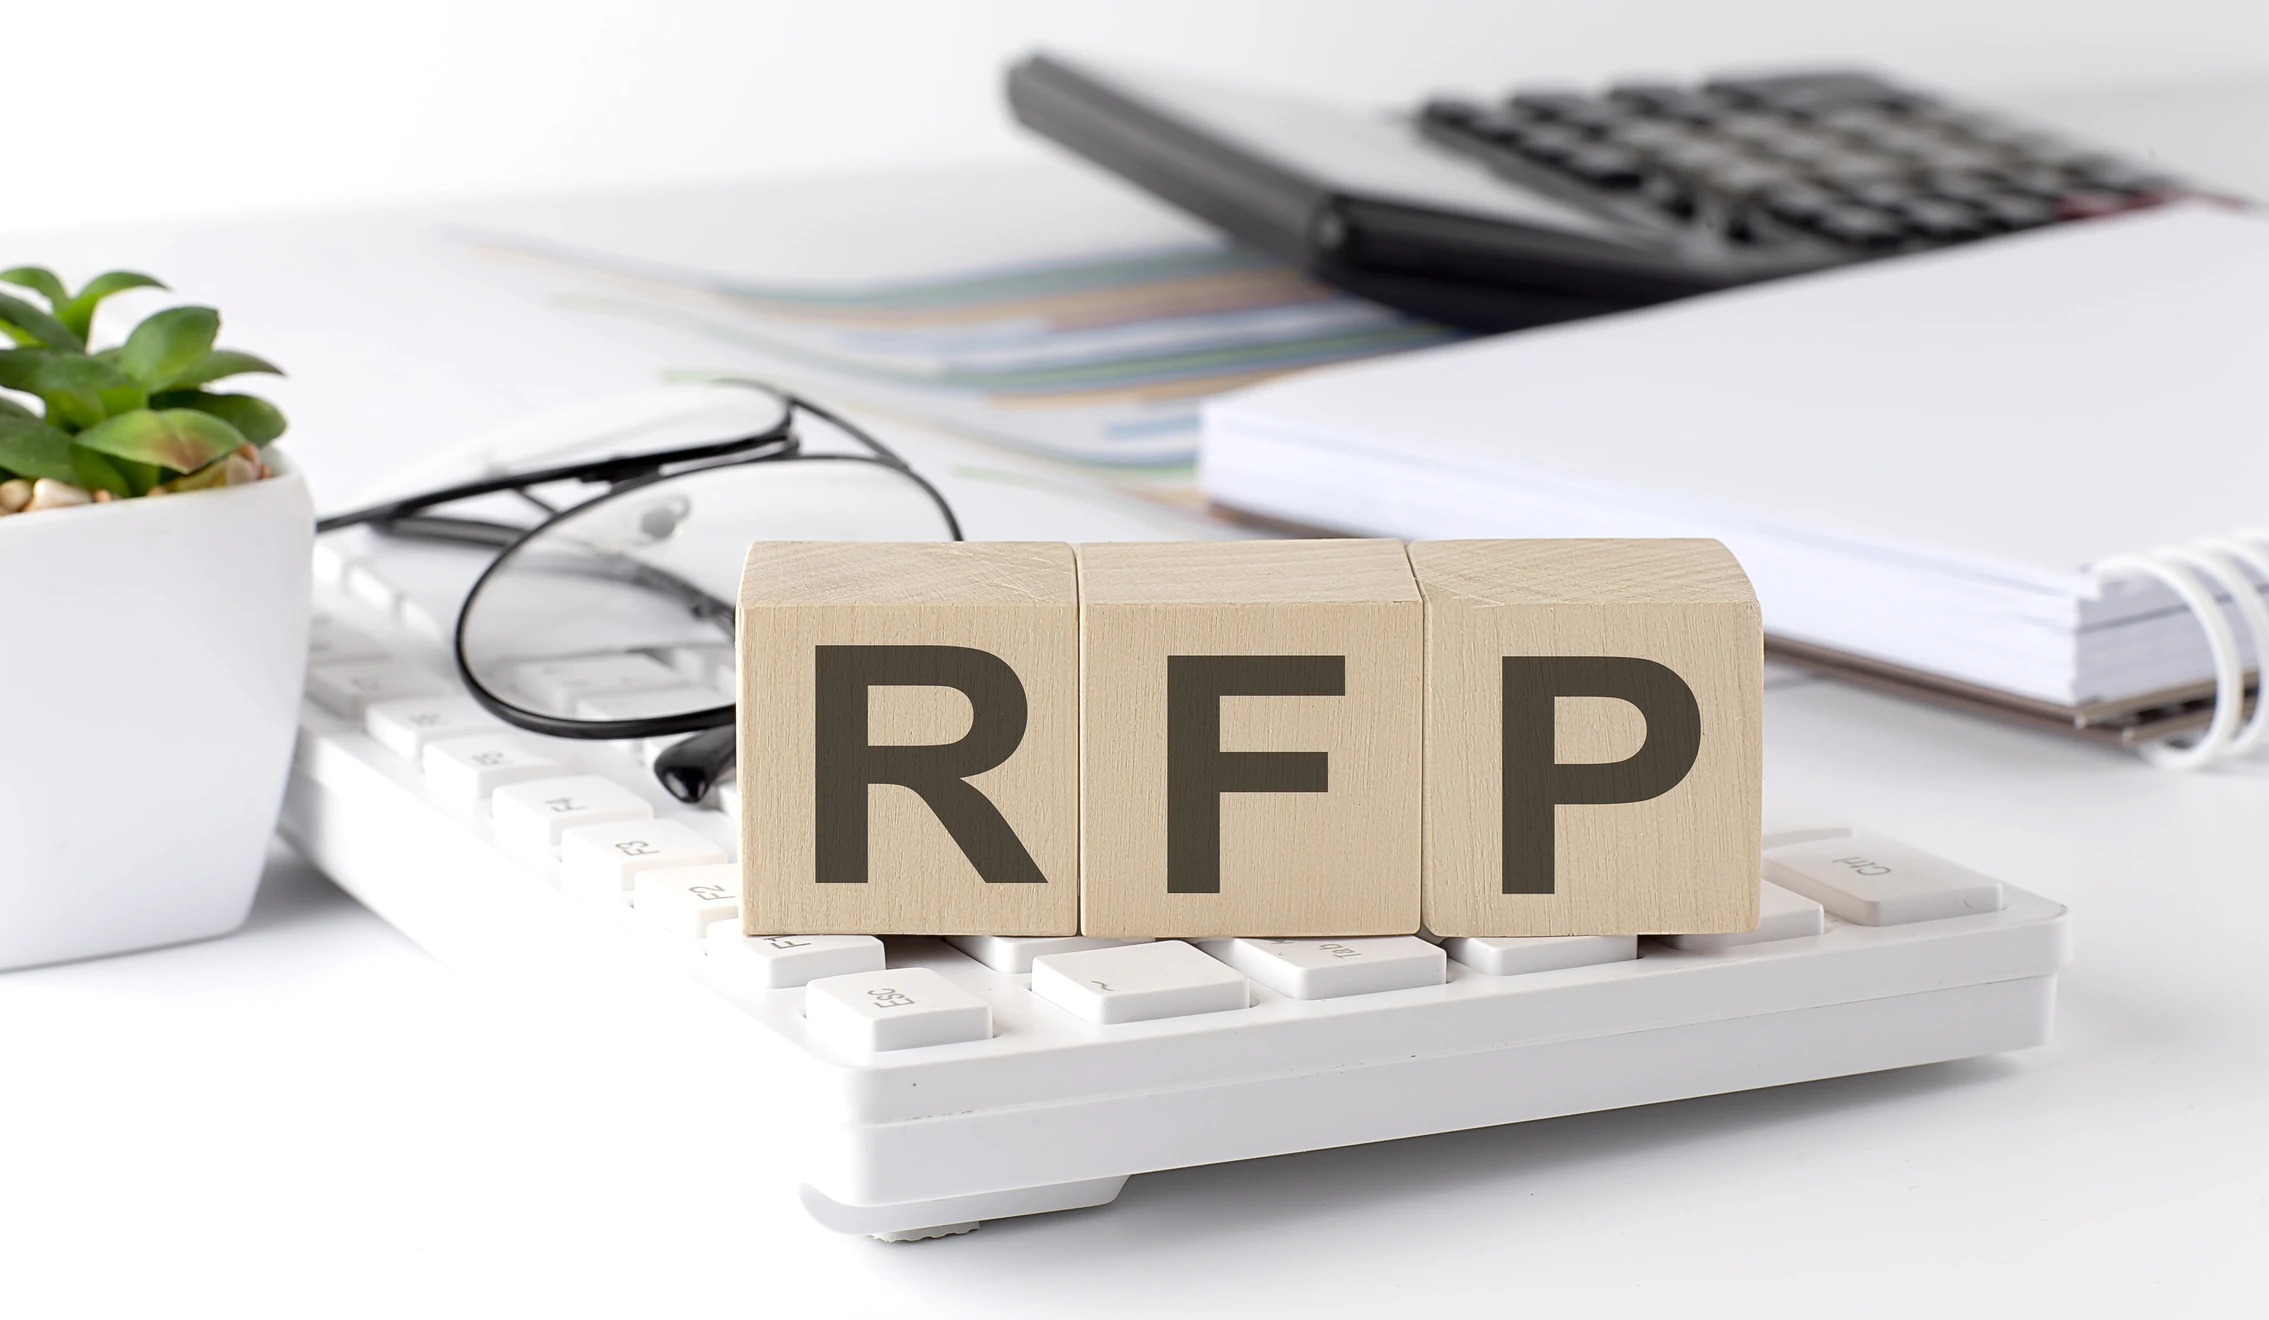 What Are the Top Mistakes When Processing RFPs for Selecting Vendors?